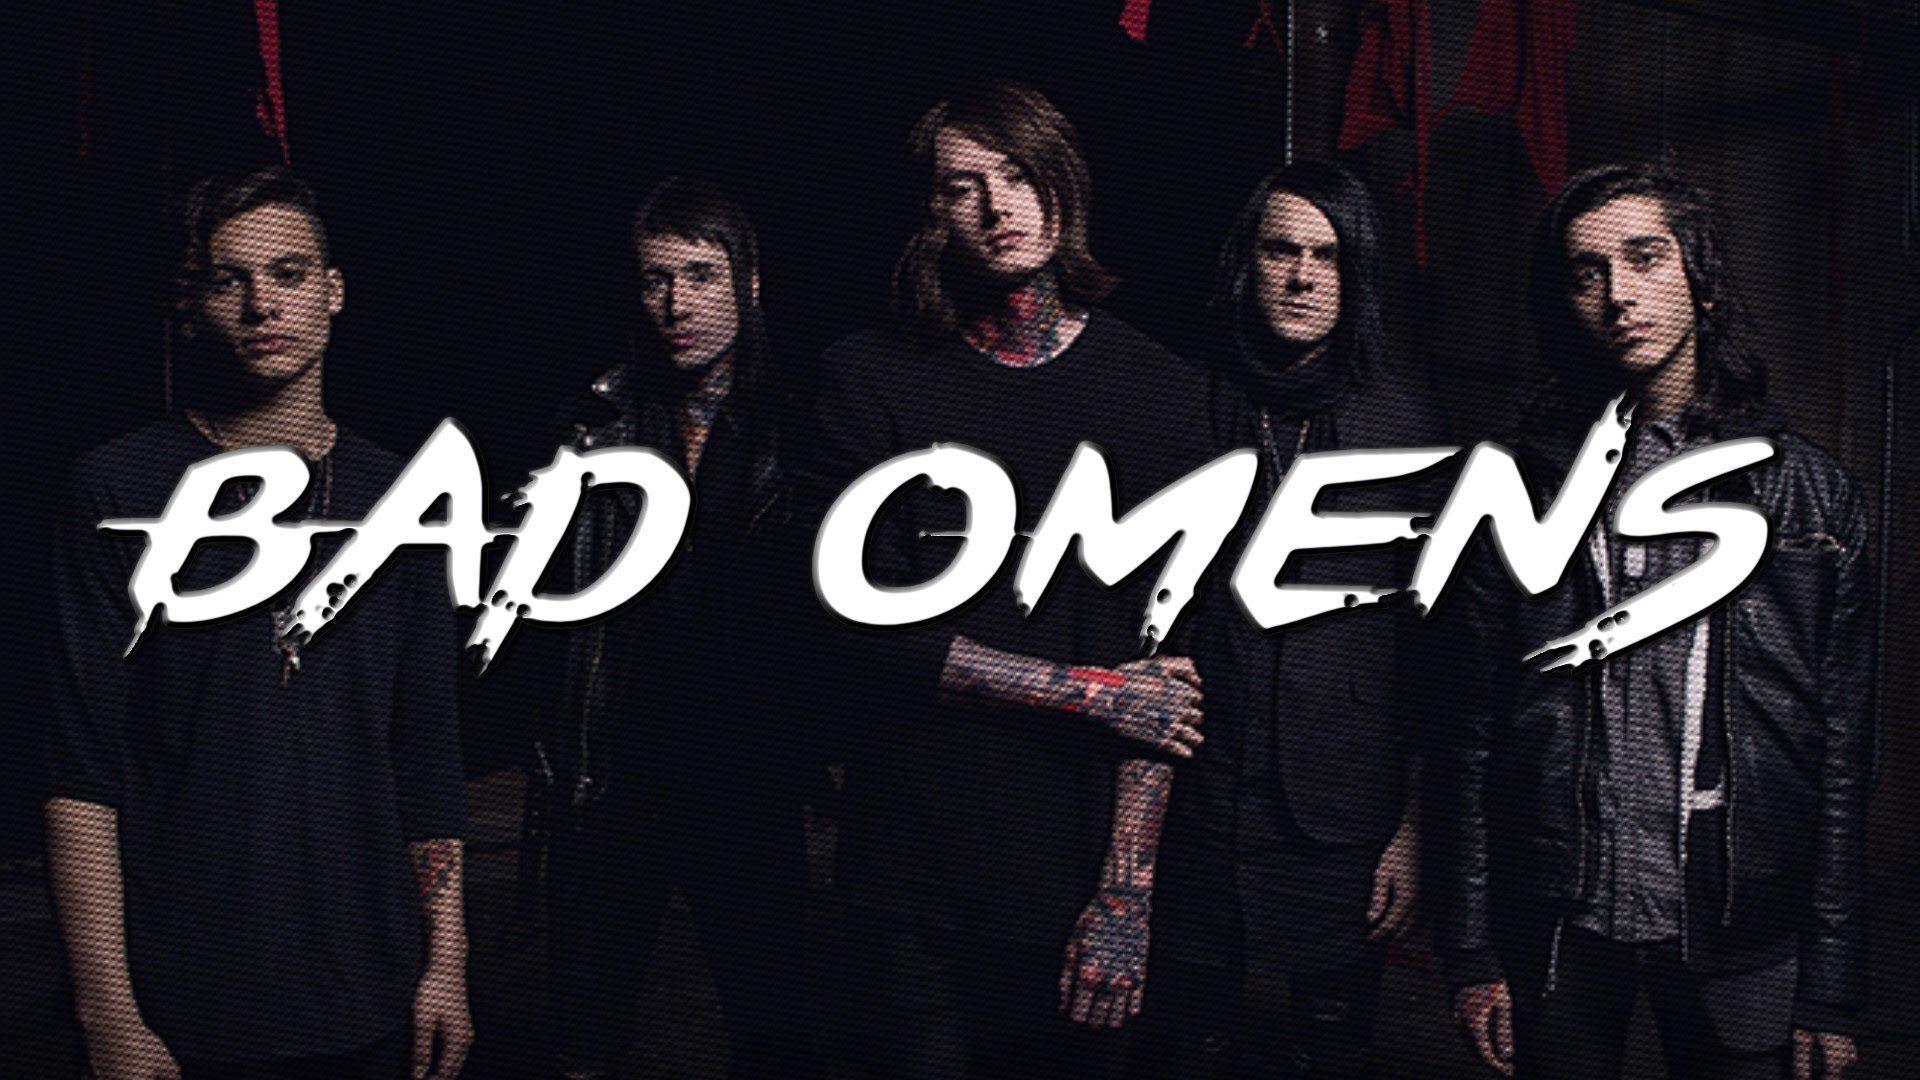 who did bad omens tour with